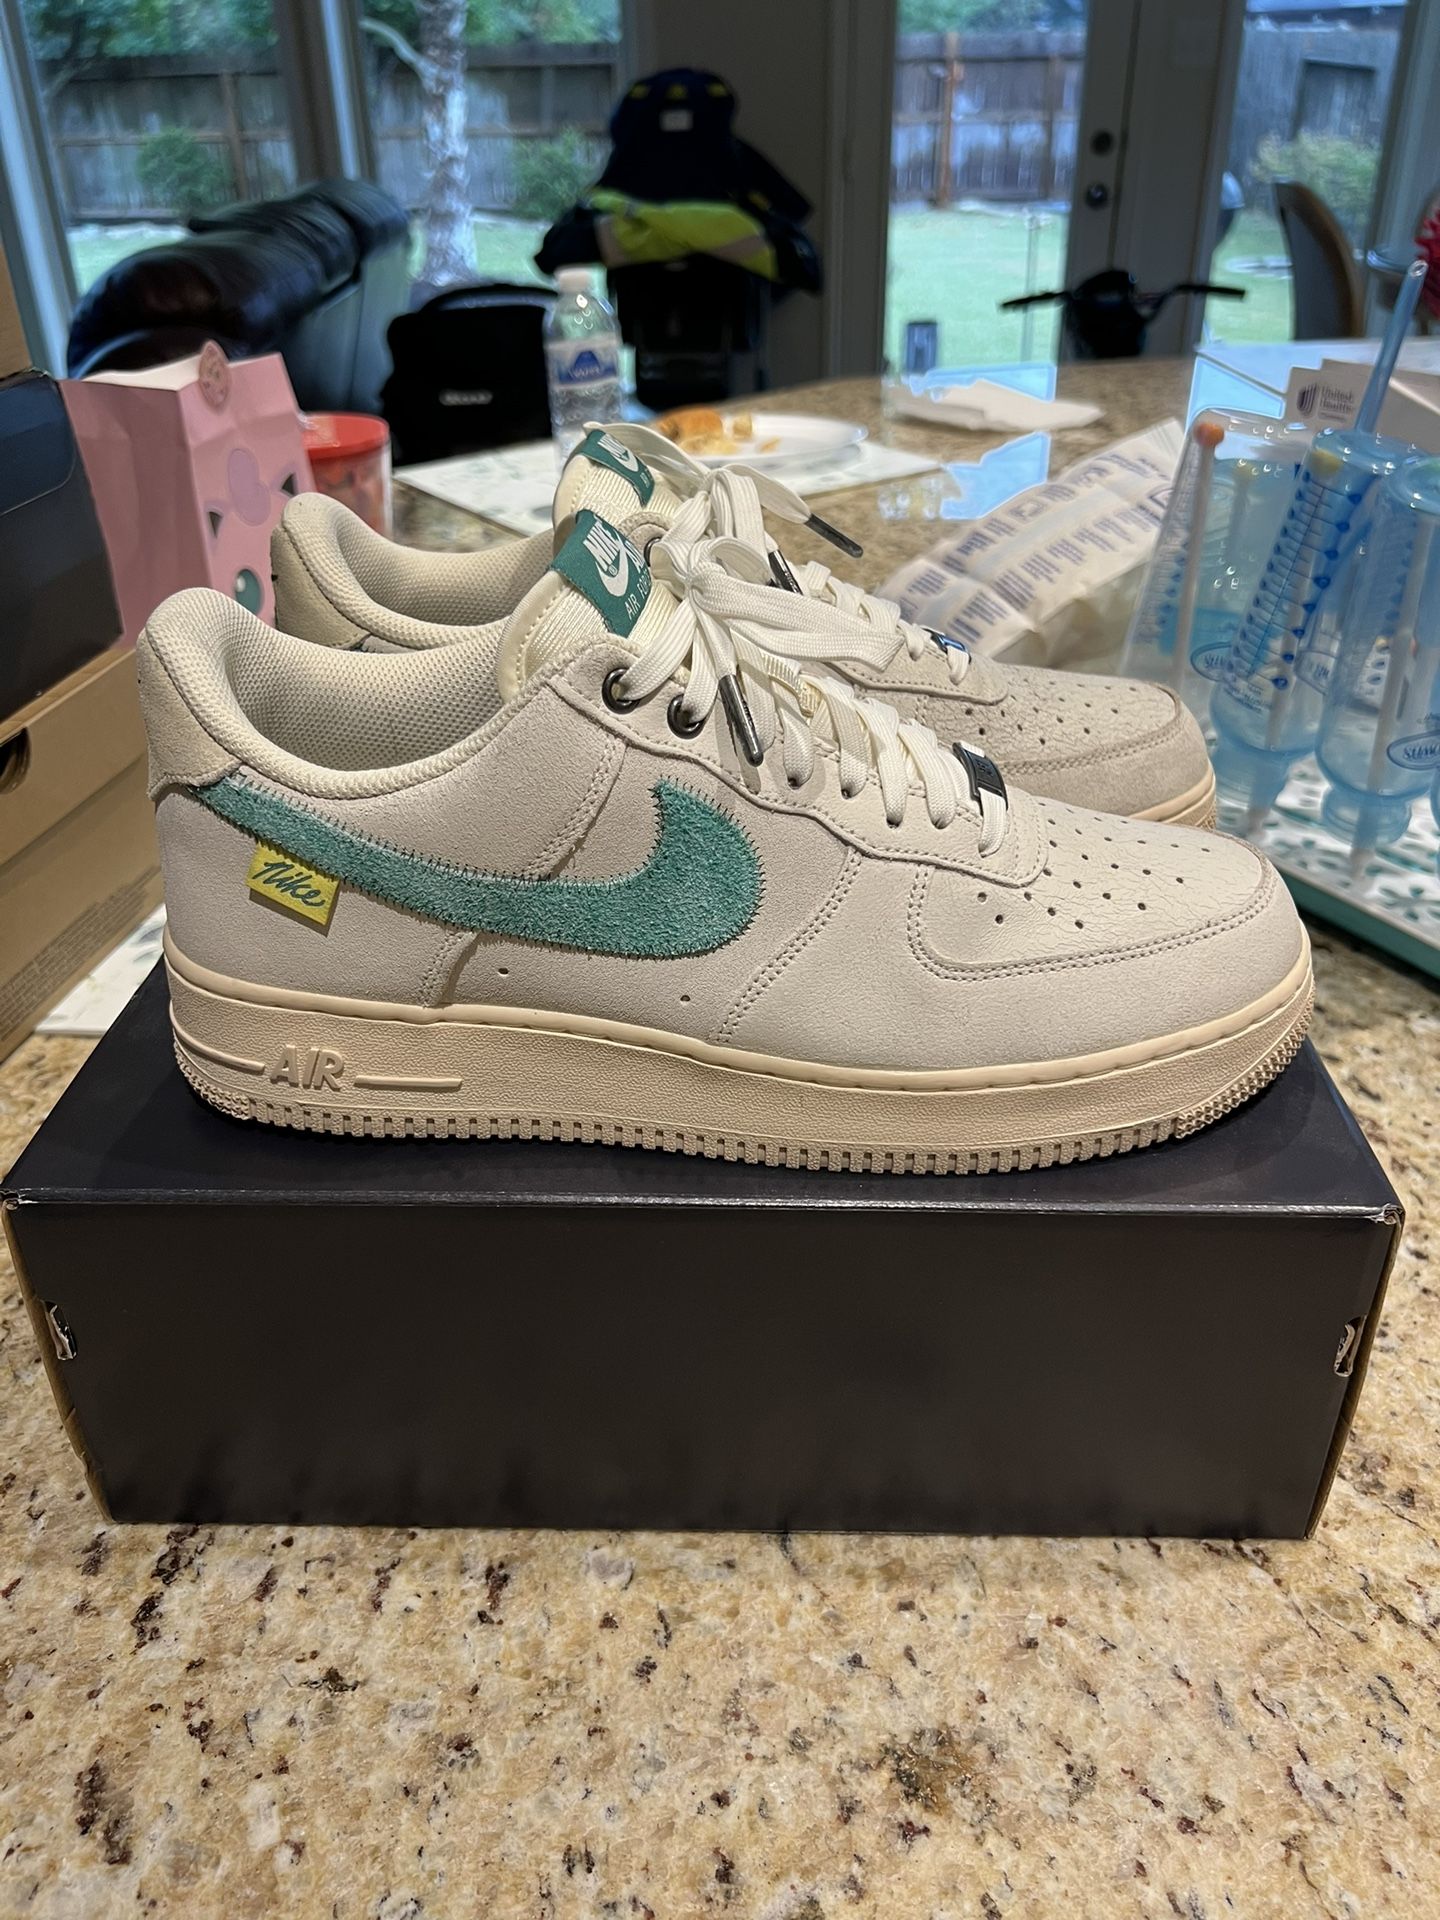 Nike Air Force 1 '07 LV8 Men Size 10.5 Sail/Green Noise-Coconut Milk  DO5876-100 for Sale in Humble, TX - OfferUp